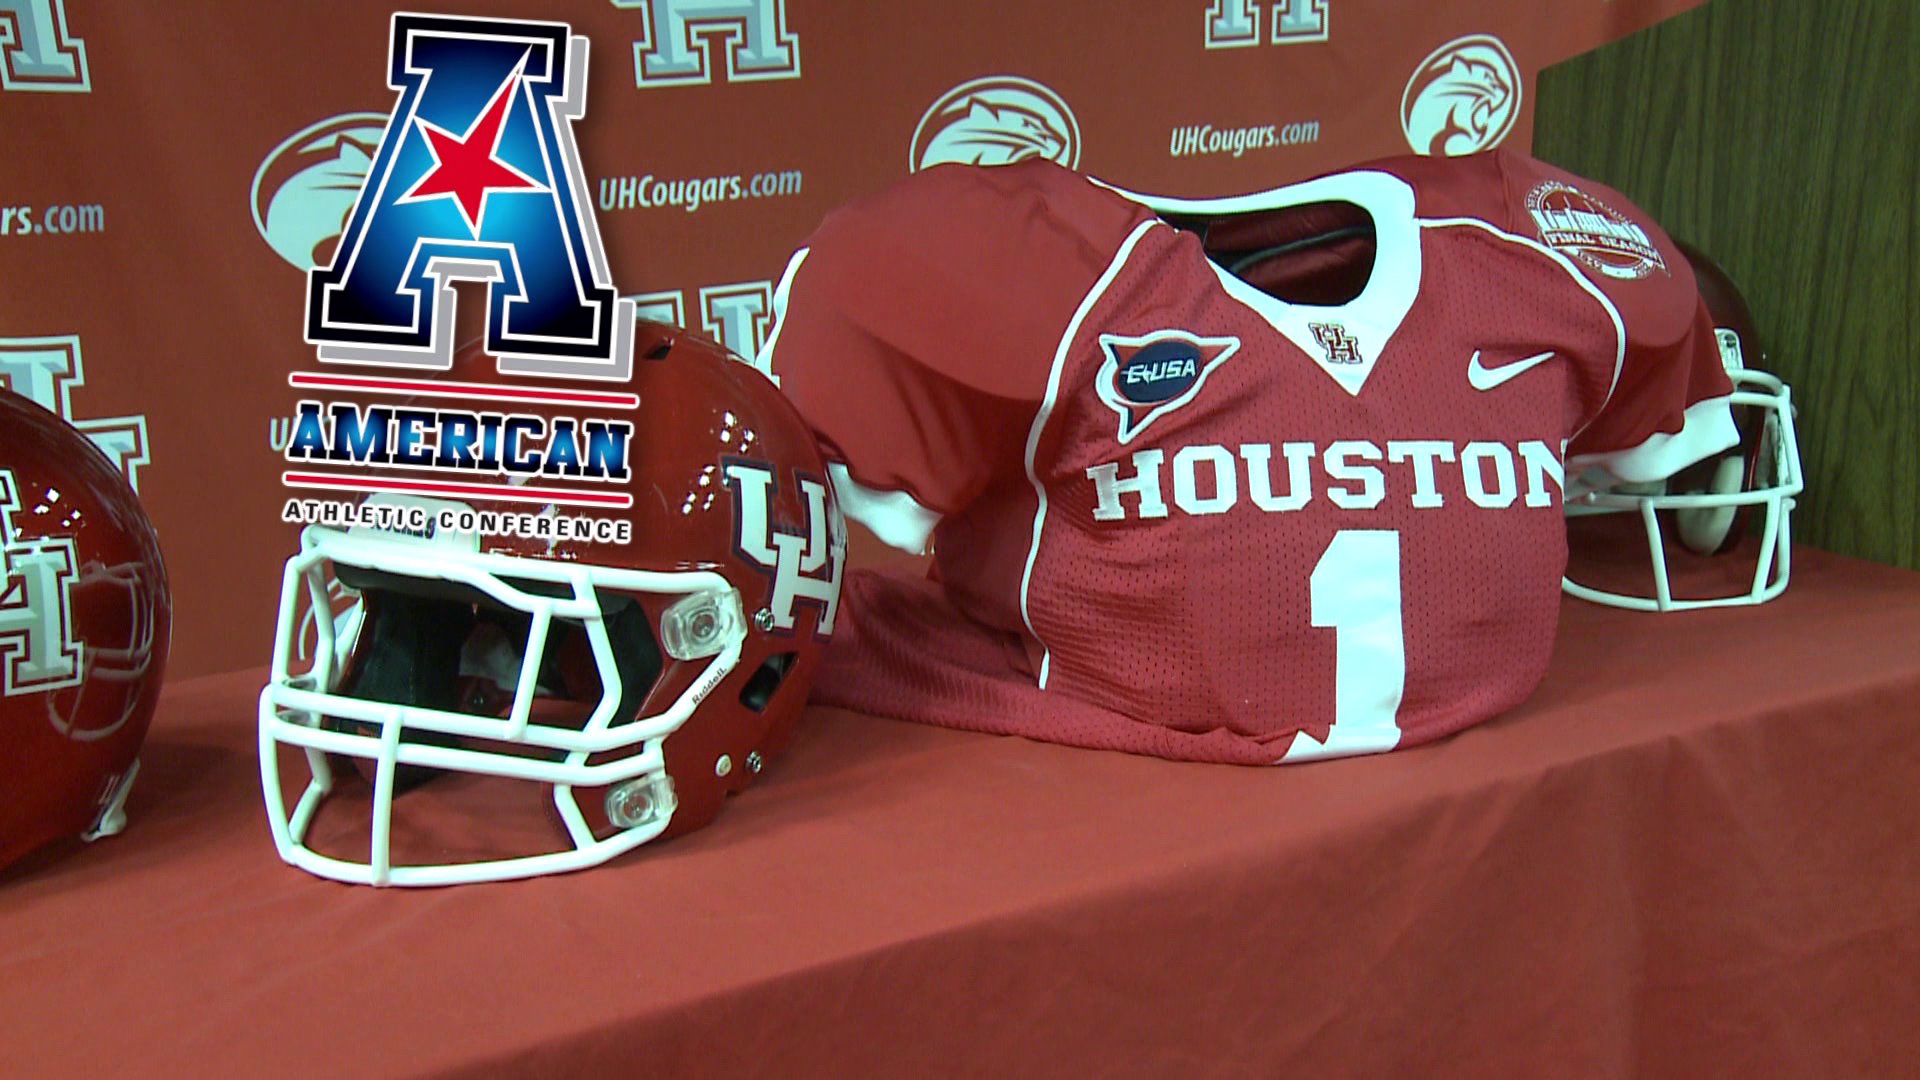 University of Houston officially joins the American Athletic ...